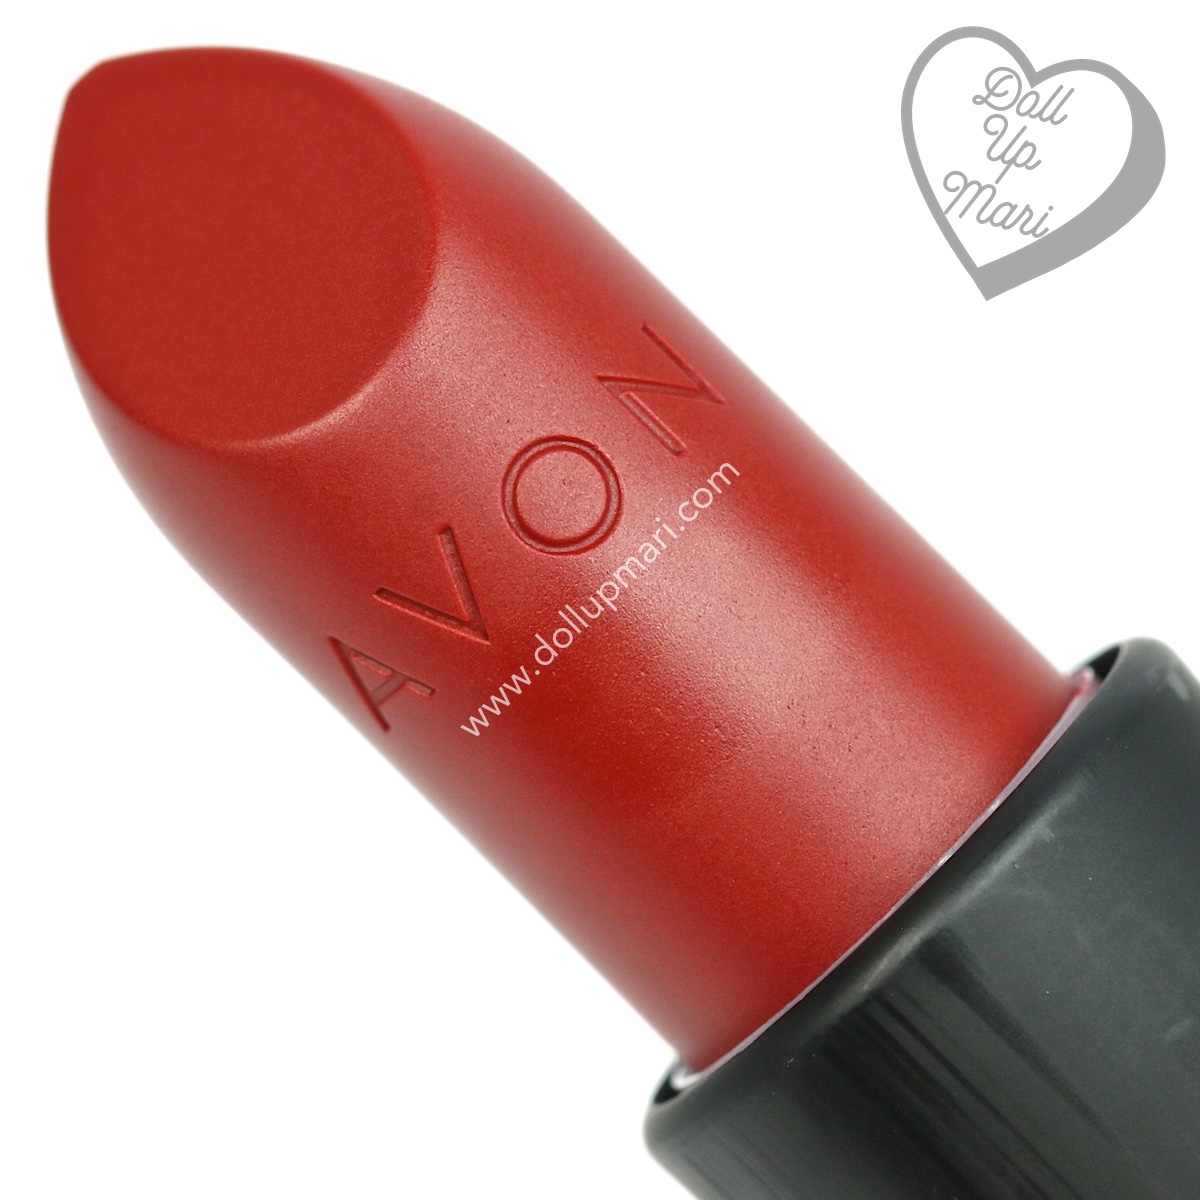 zoom in of Red Supreme shade of AVON Perfectly Matte Lipstick